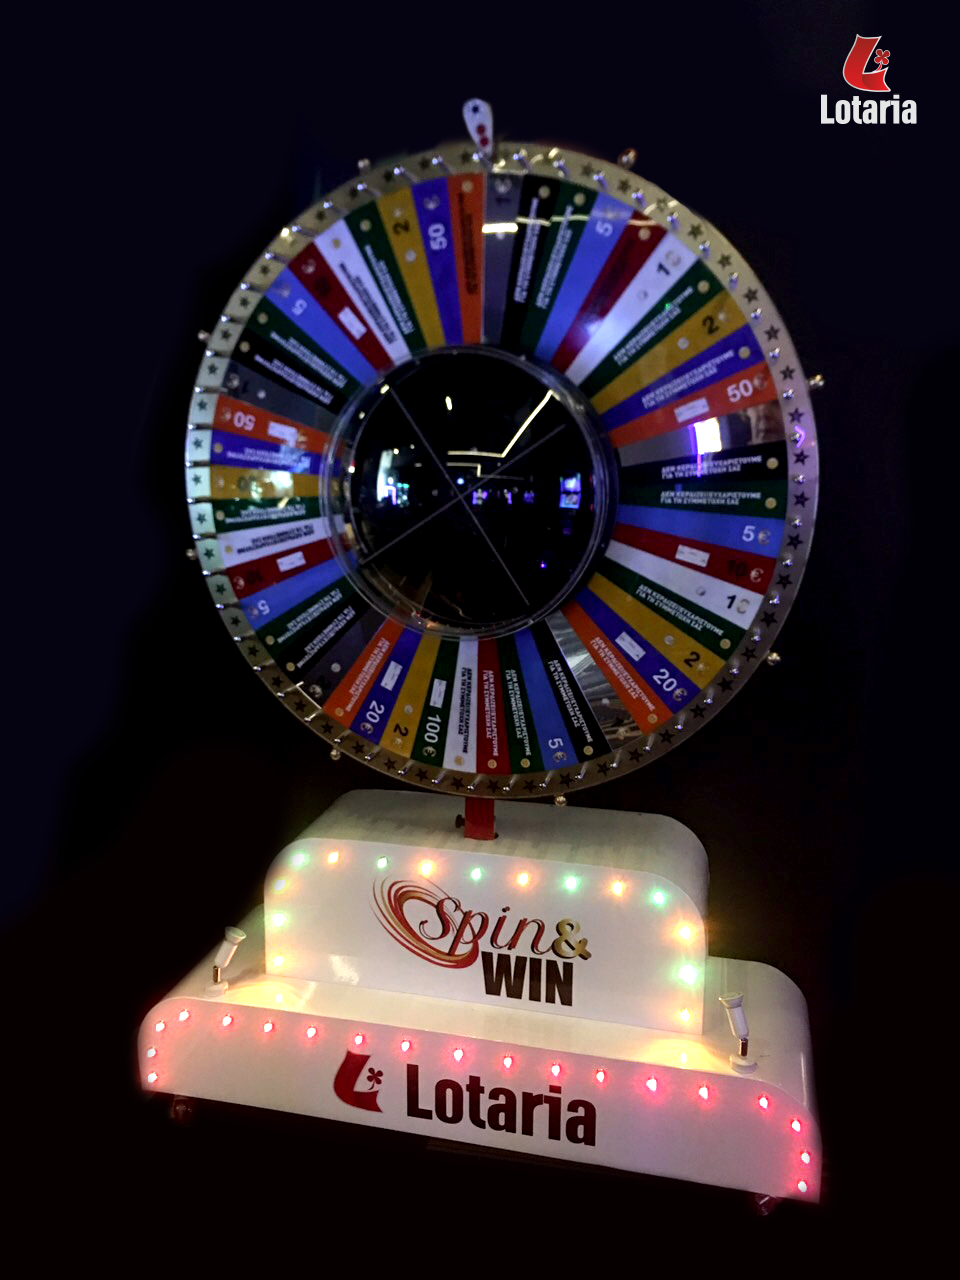 spin & win